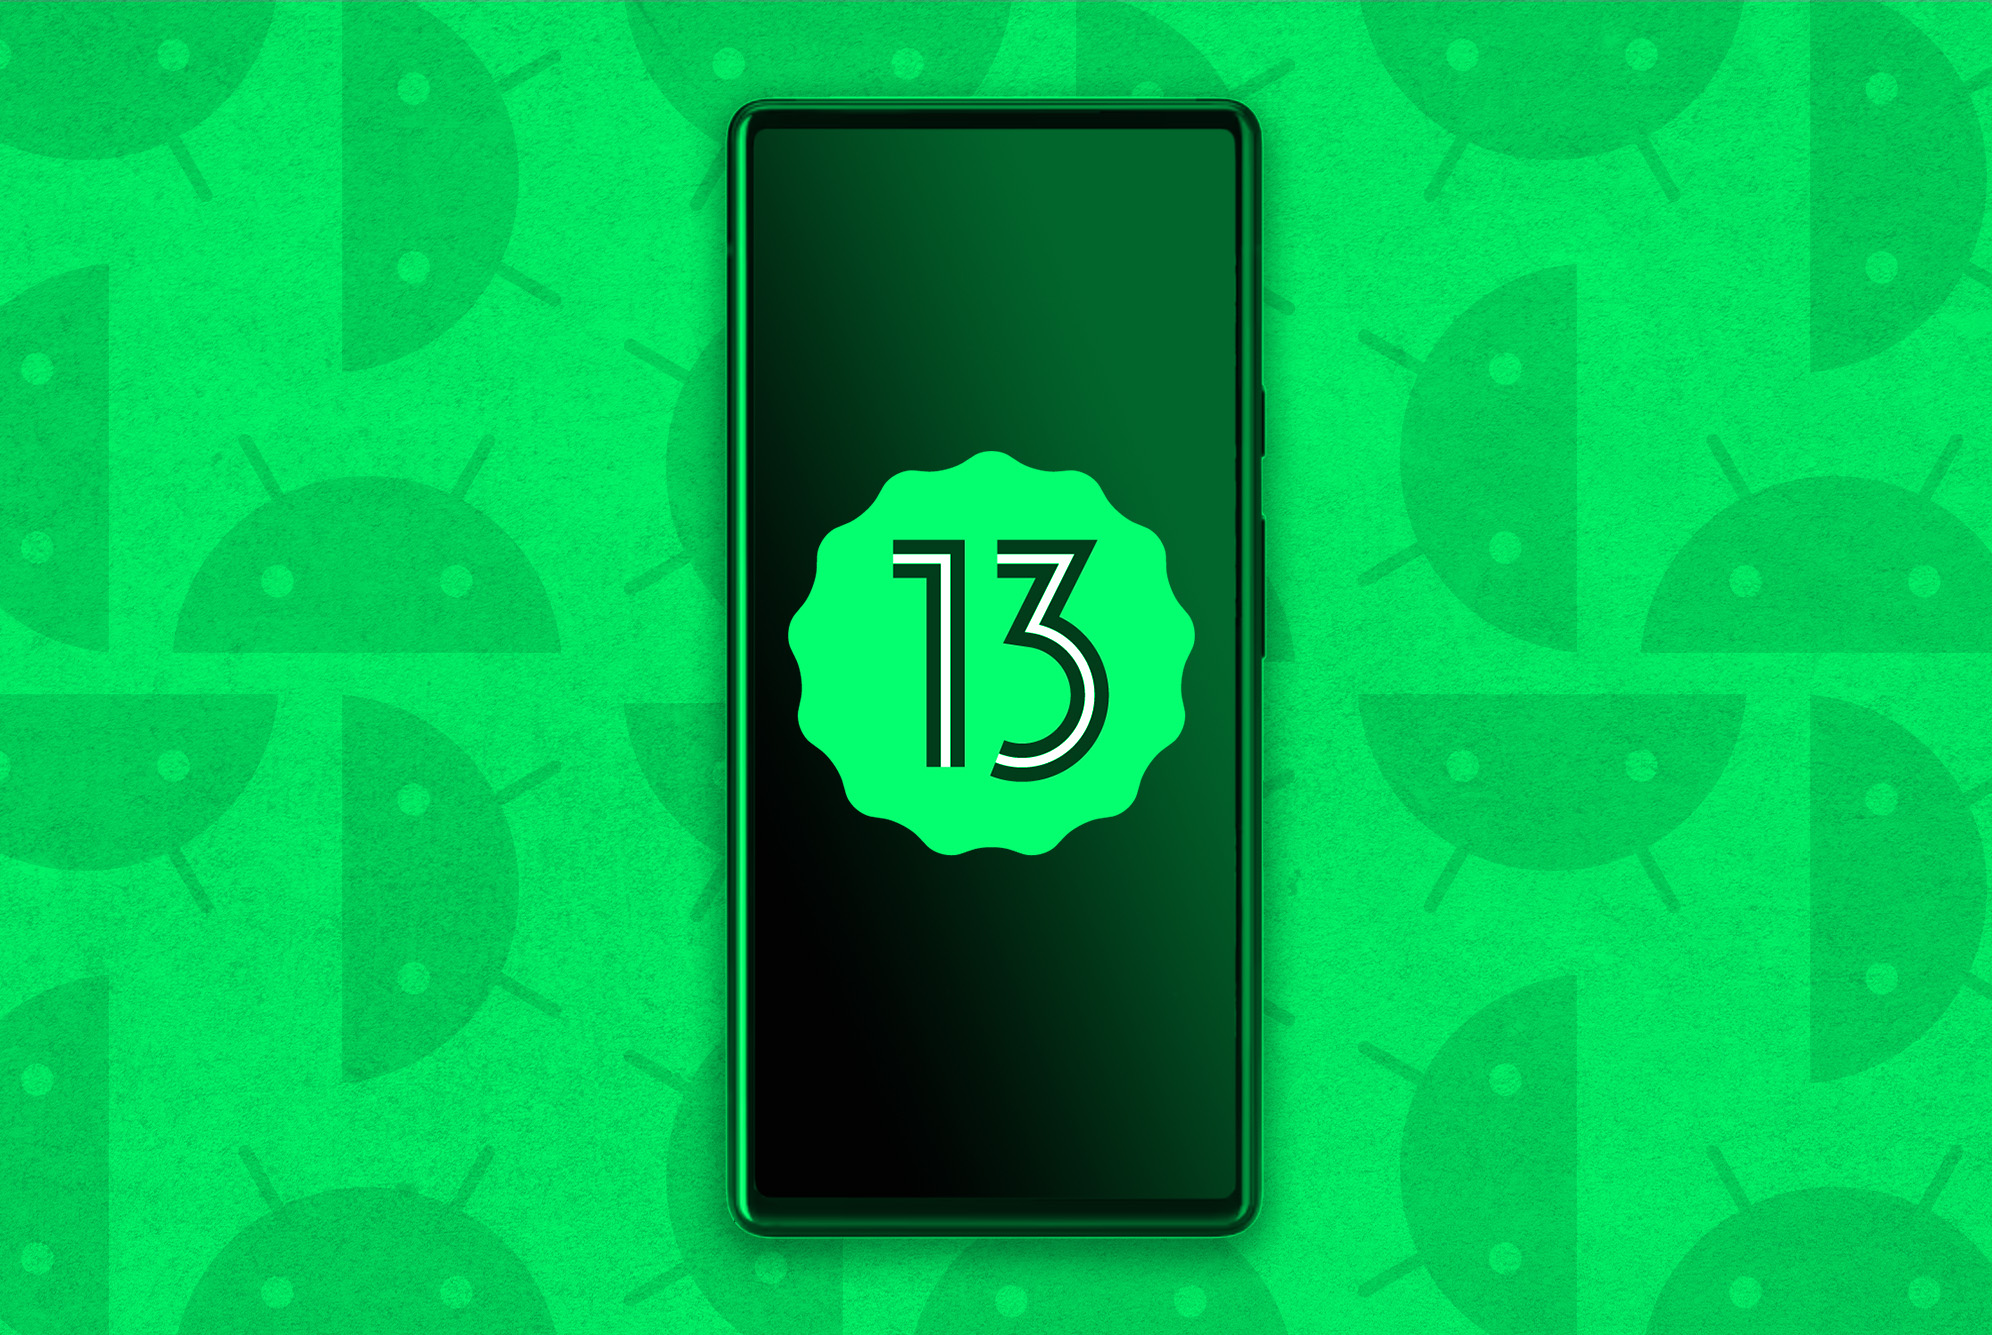 Lucky number Android 13: The latest features and updates